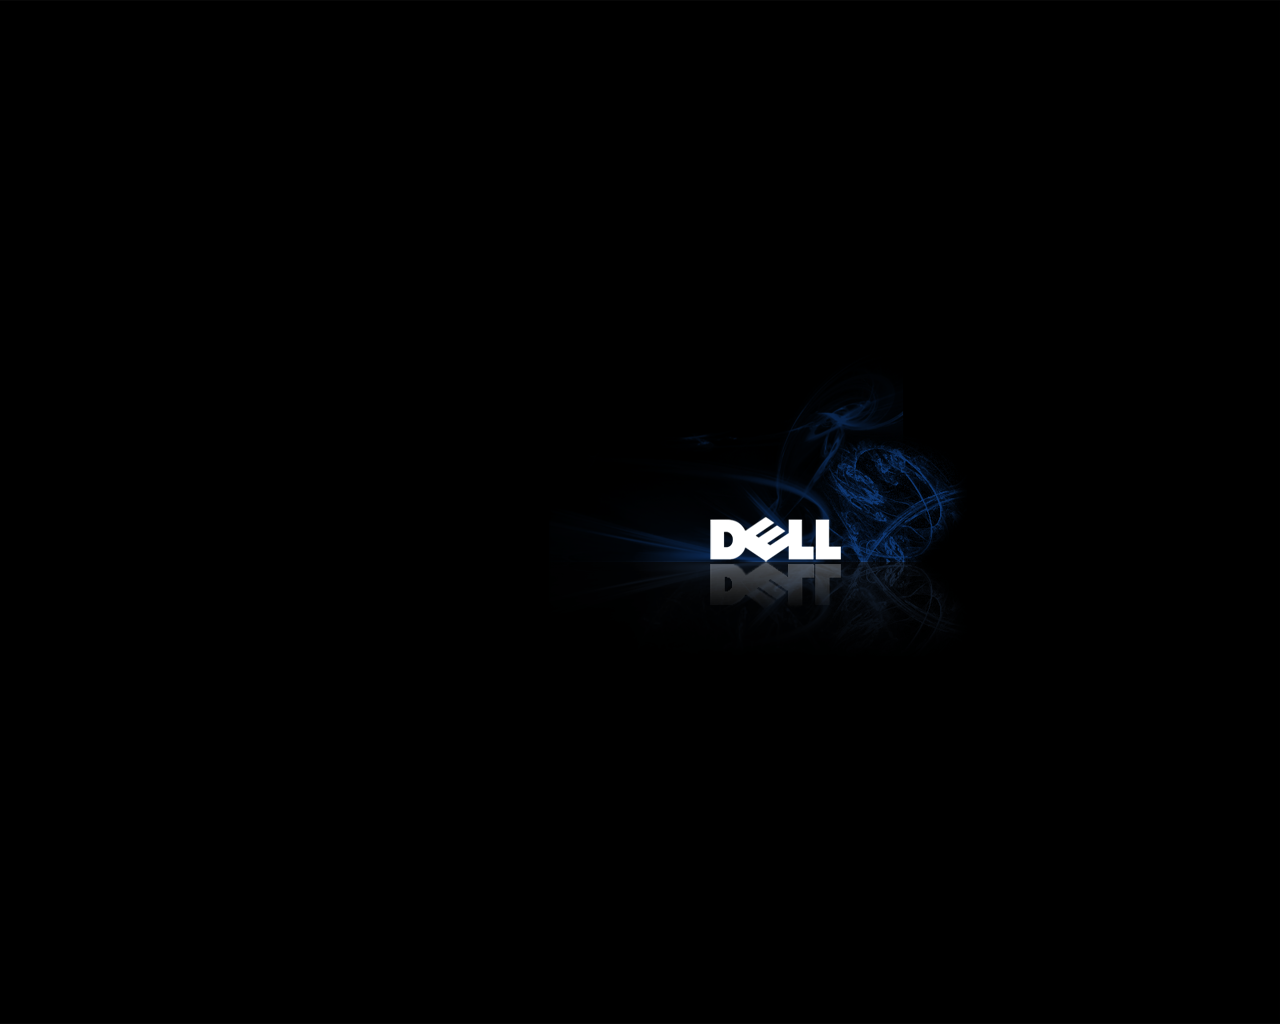 HD Wallpapers For Dell Laptop Free Download Wallpaper DaWallpaperz